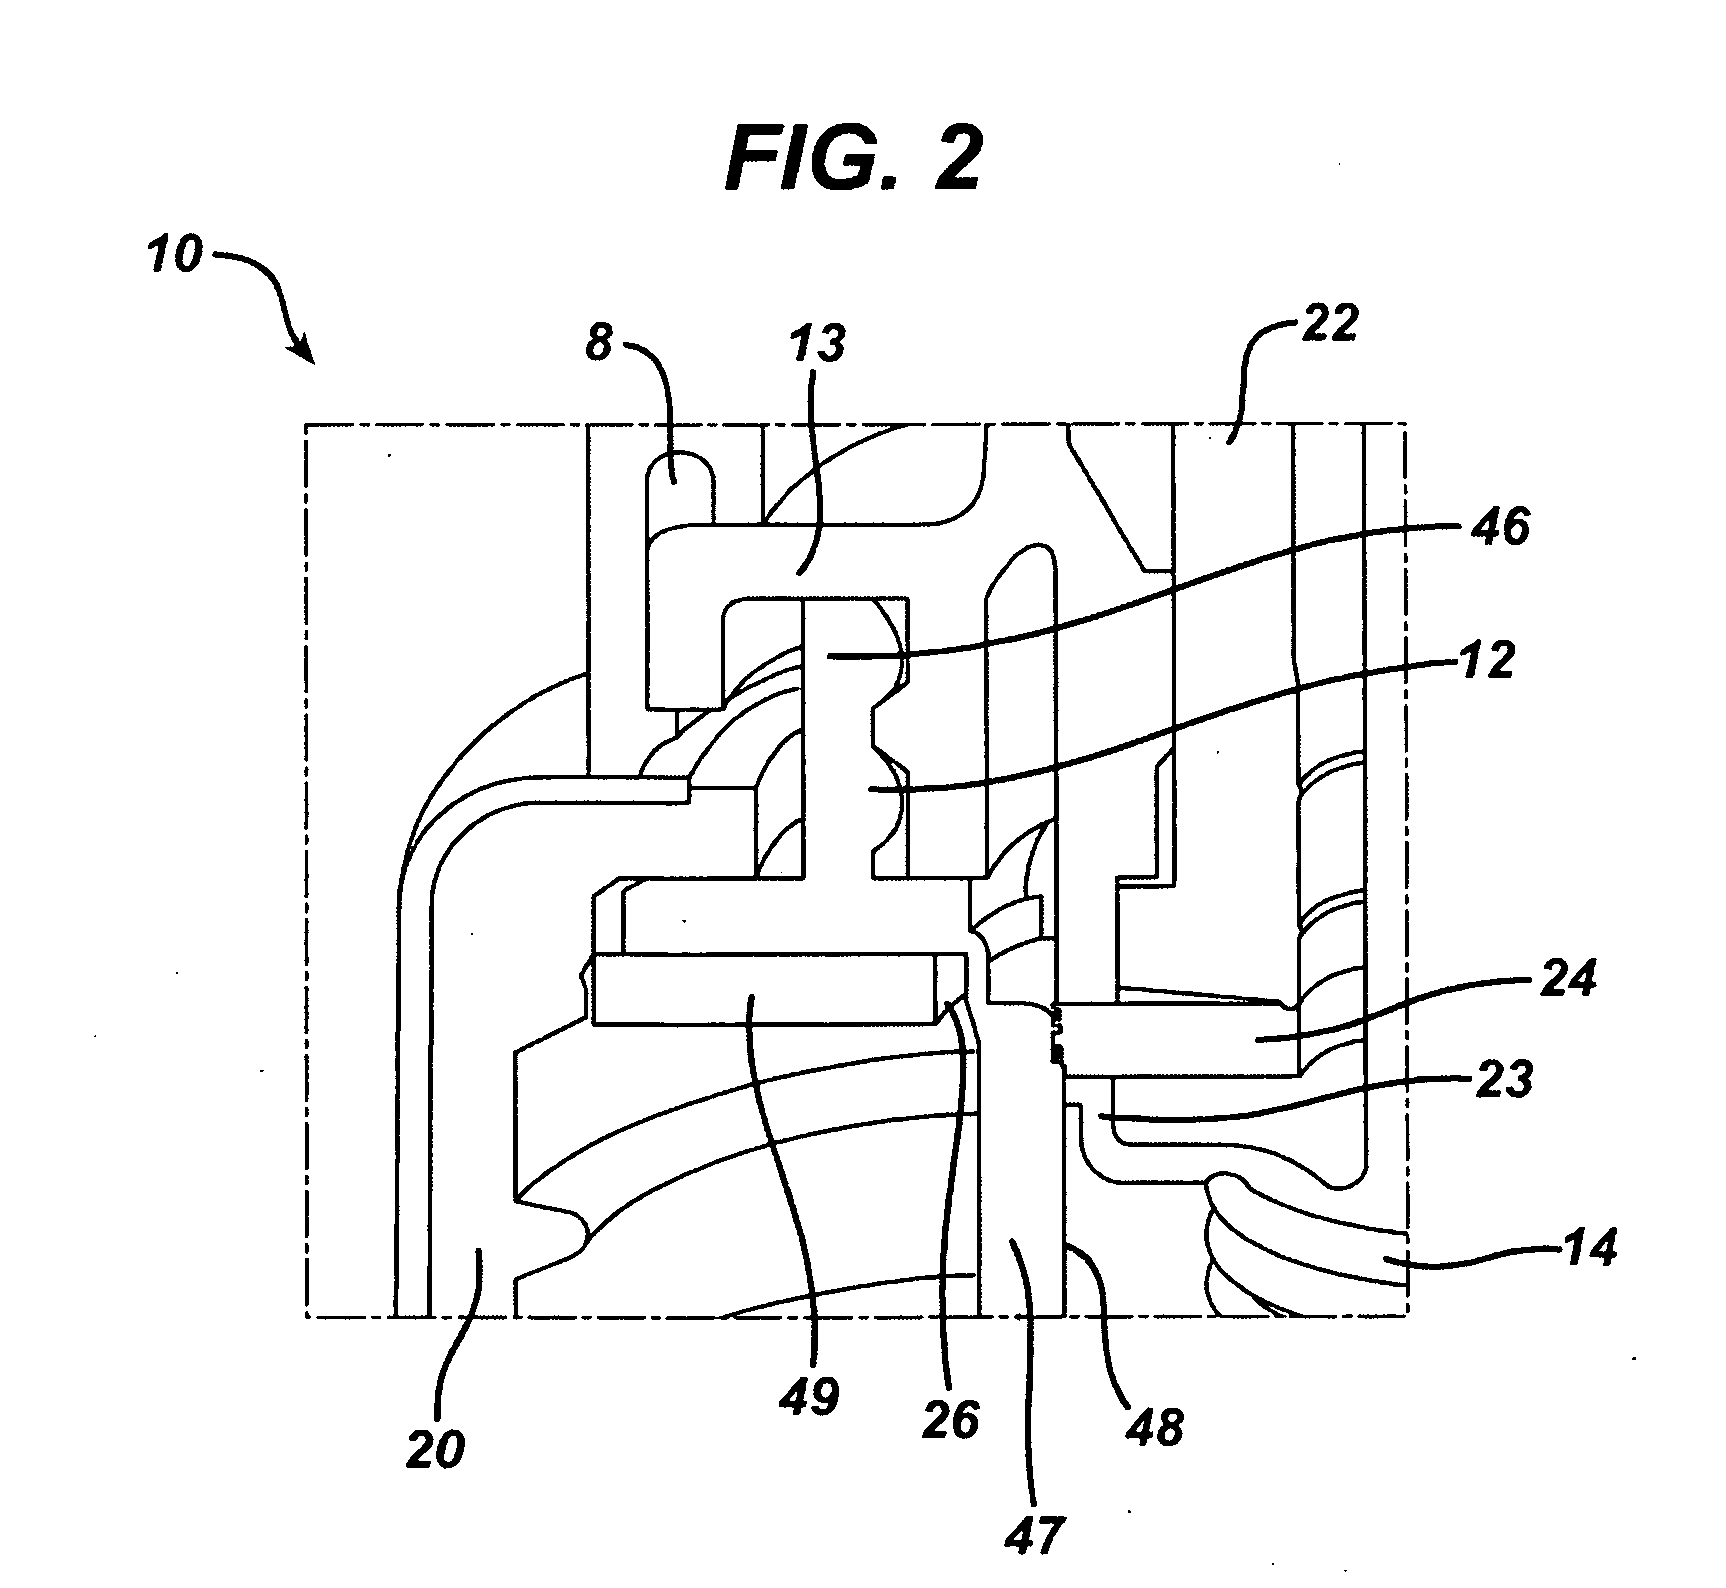 Product containing vegetable oil and dispensing article